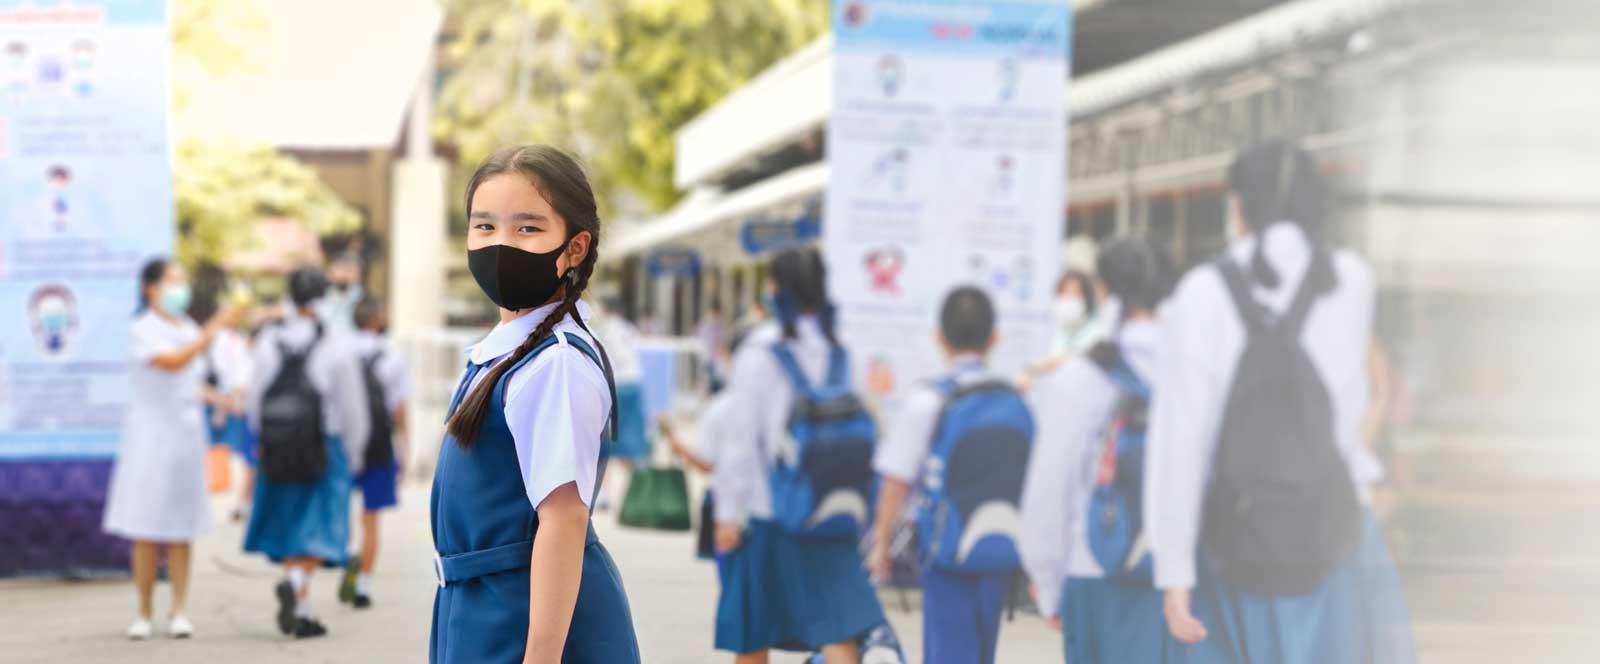 A young child in school uniform wearing a face mask